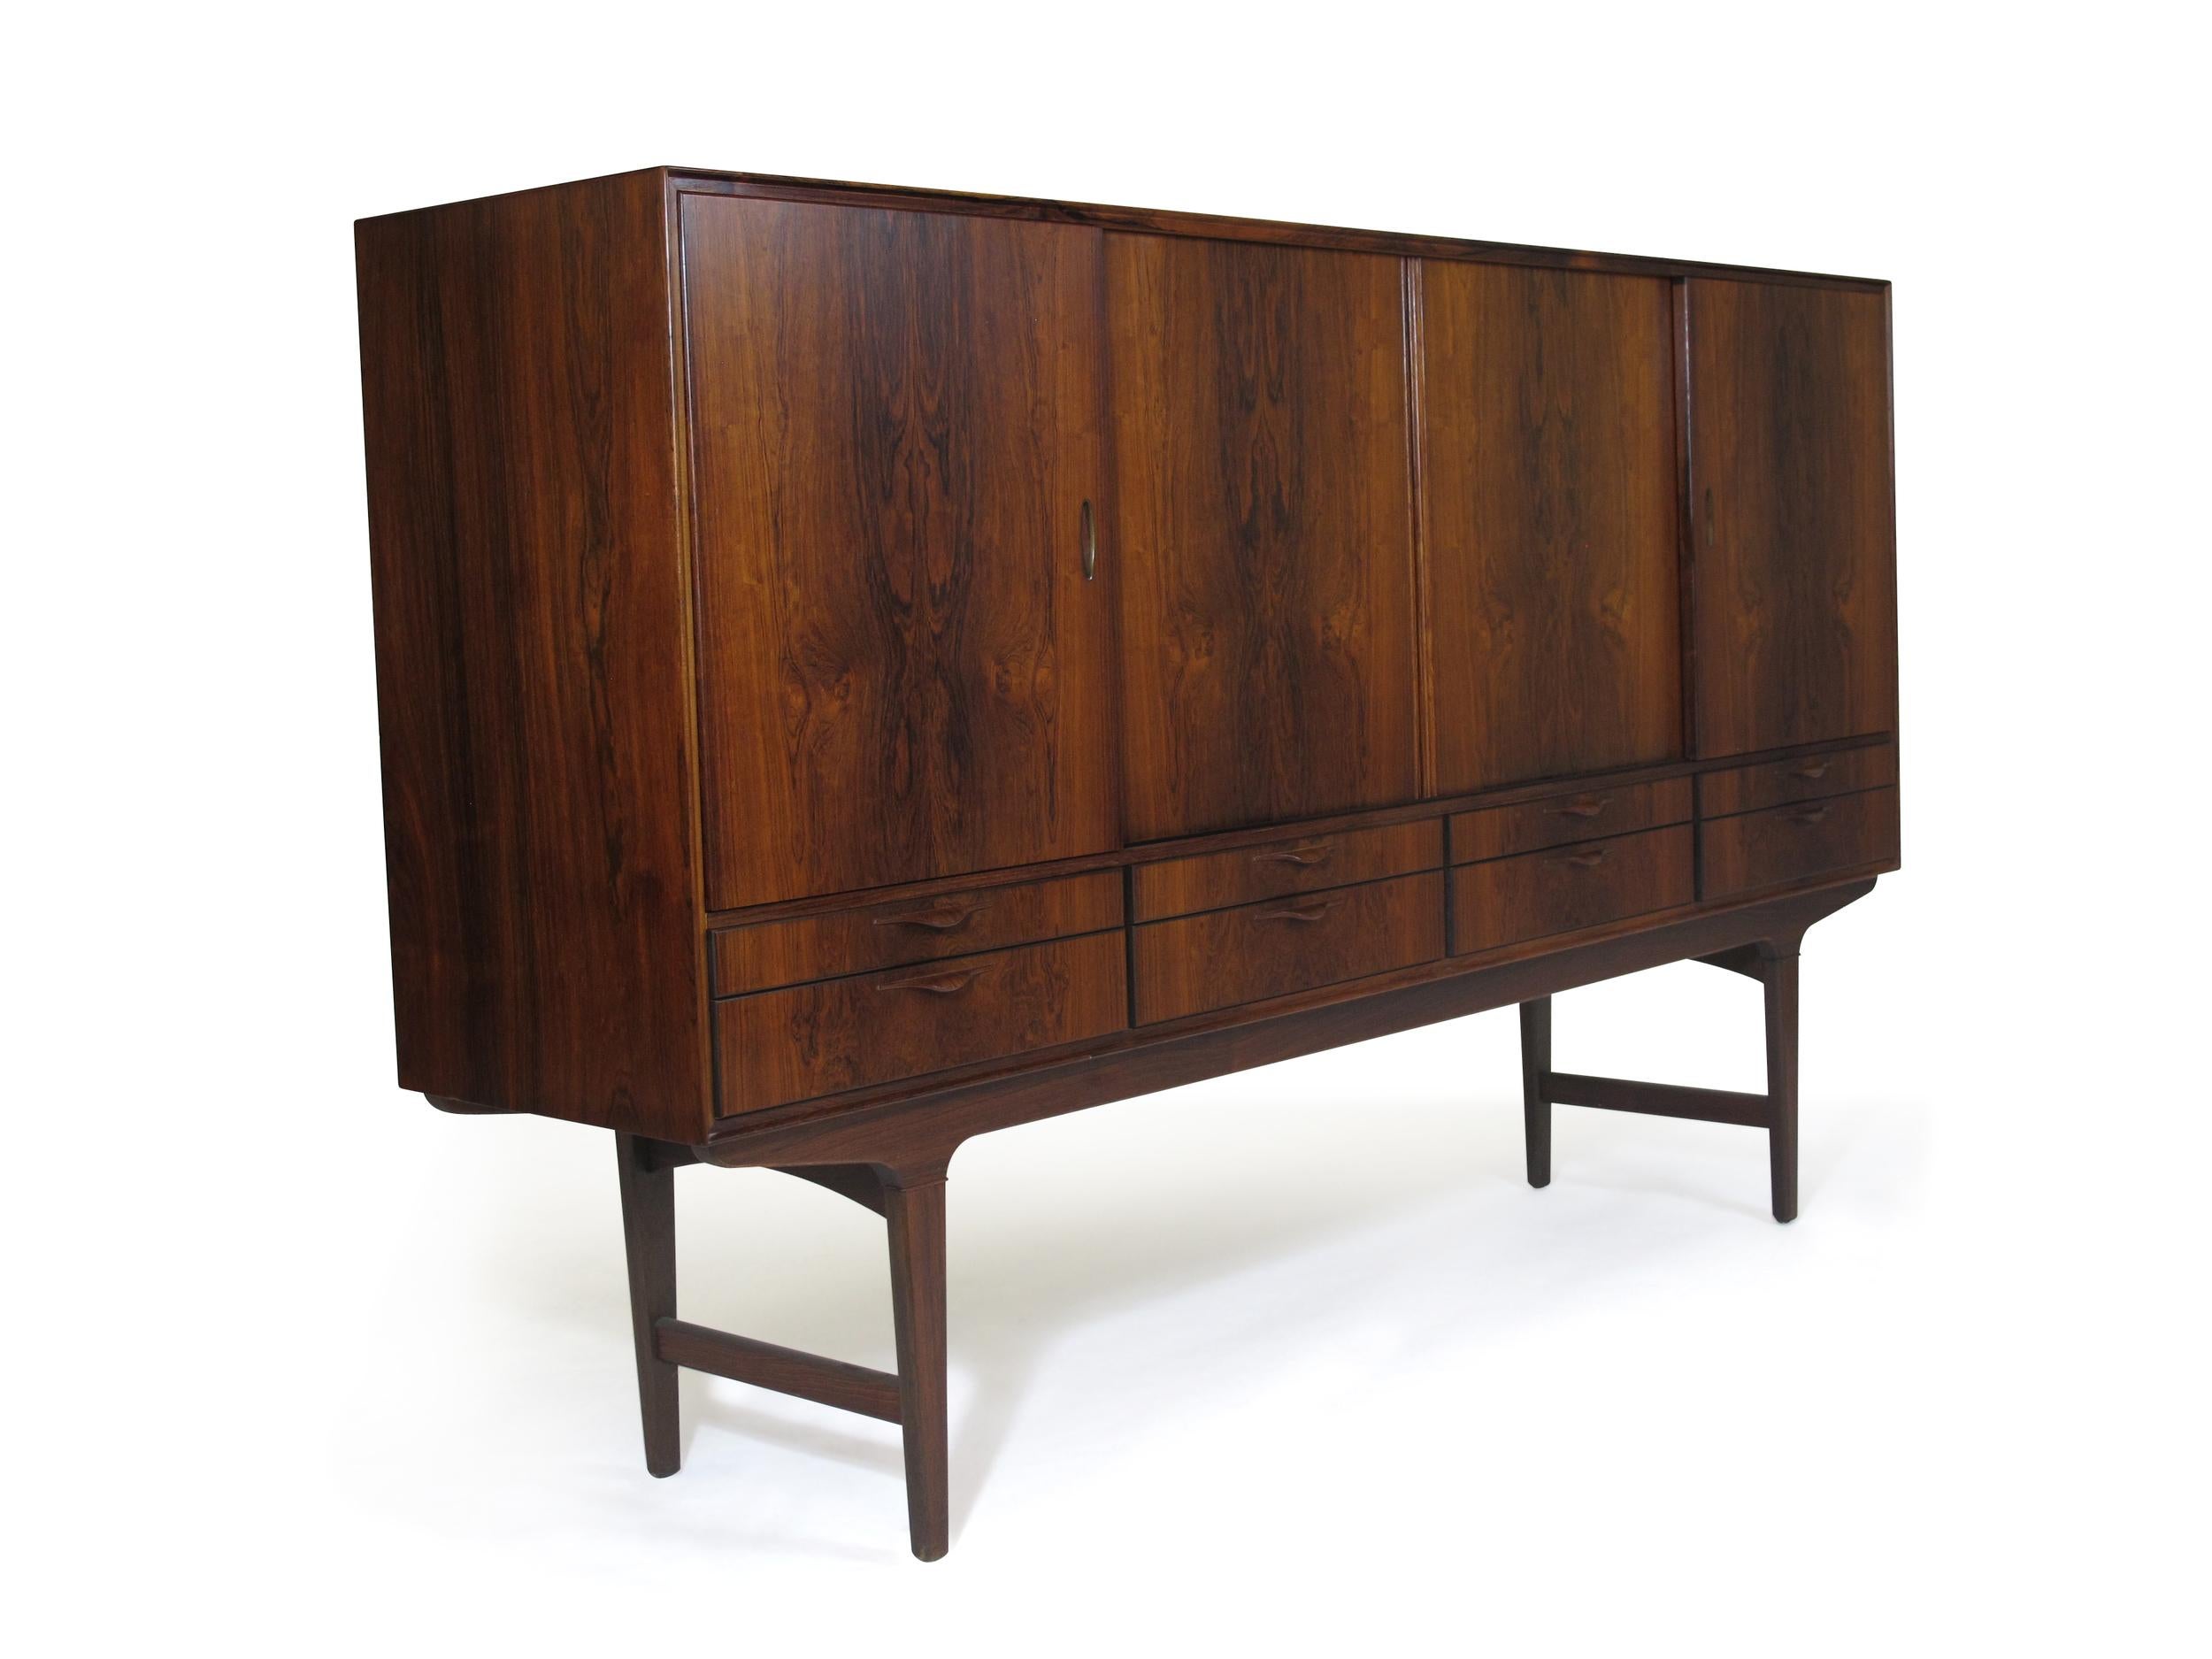 20th Century Brazilian Rosewood Tall Sideboard Credenza